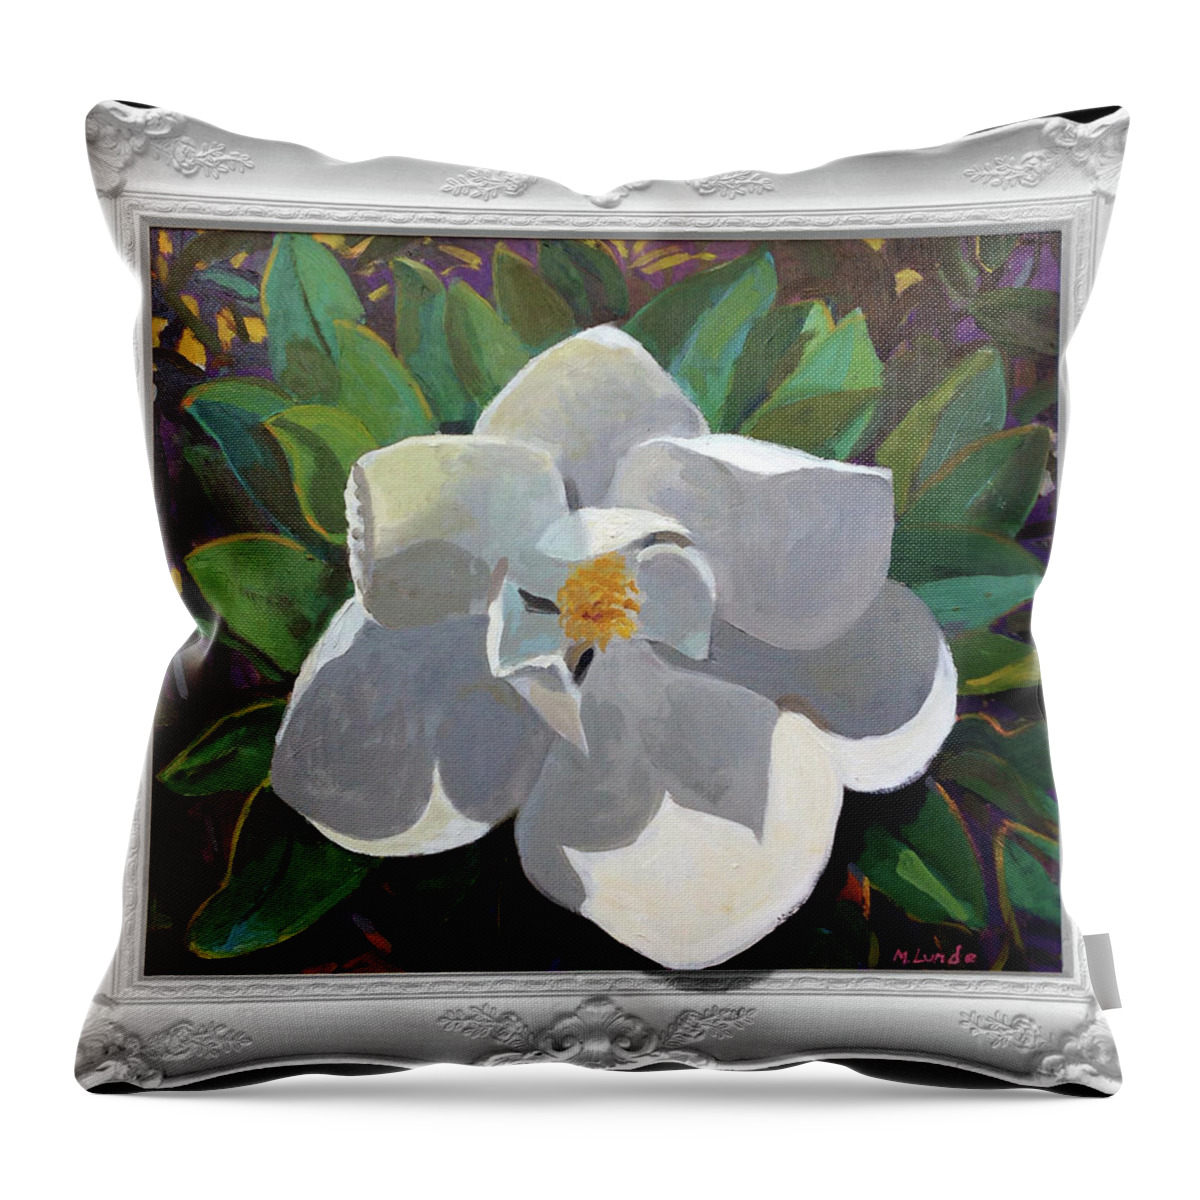 Magnolia Throw Pillow featuring the painting Magic Magnolia by Mark Lunde